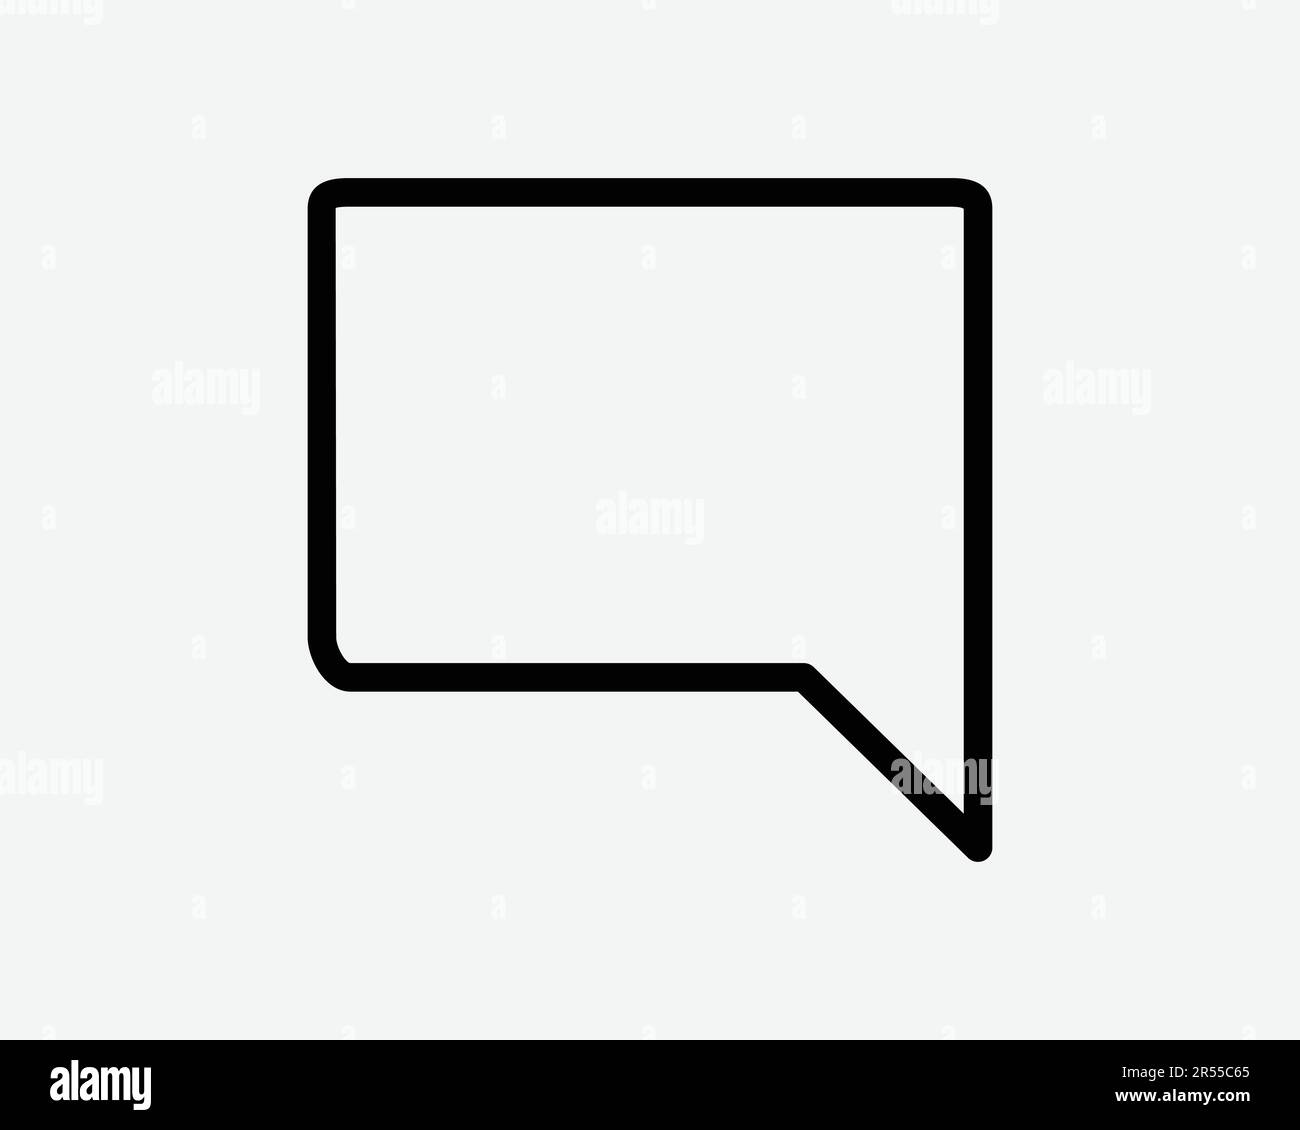 Chat Box Line Icon. Speech Comment Dialogue Text Message Discussion Balloon Outline Sign Symbol Black Artwork Graphic Illustration Clipart EPS Vector Stock Vector